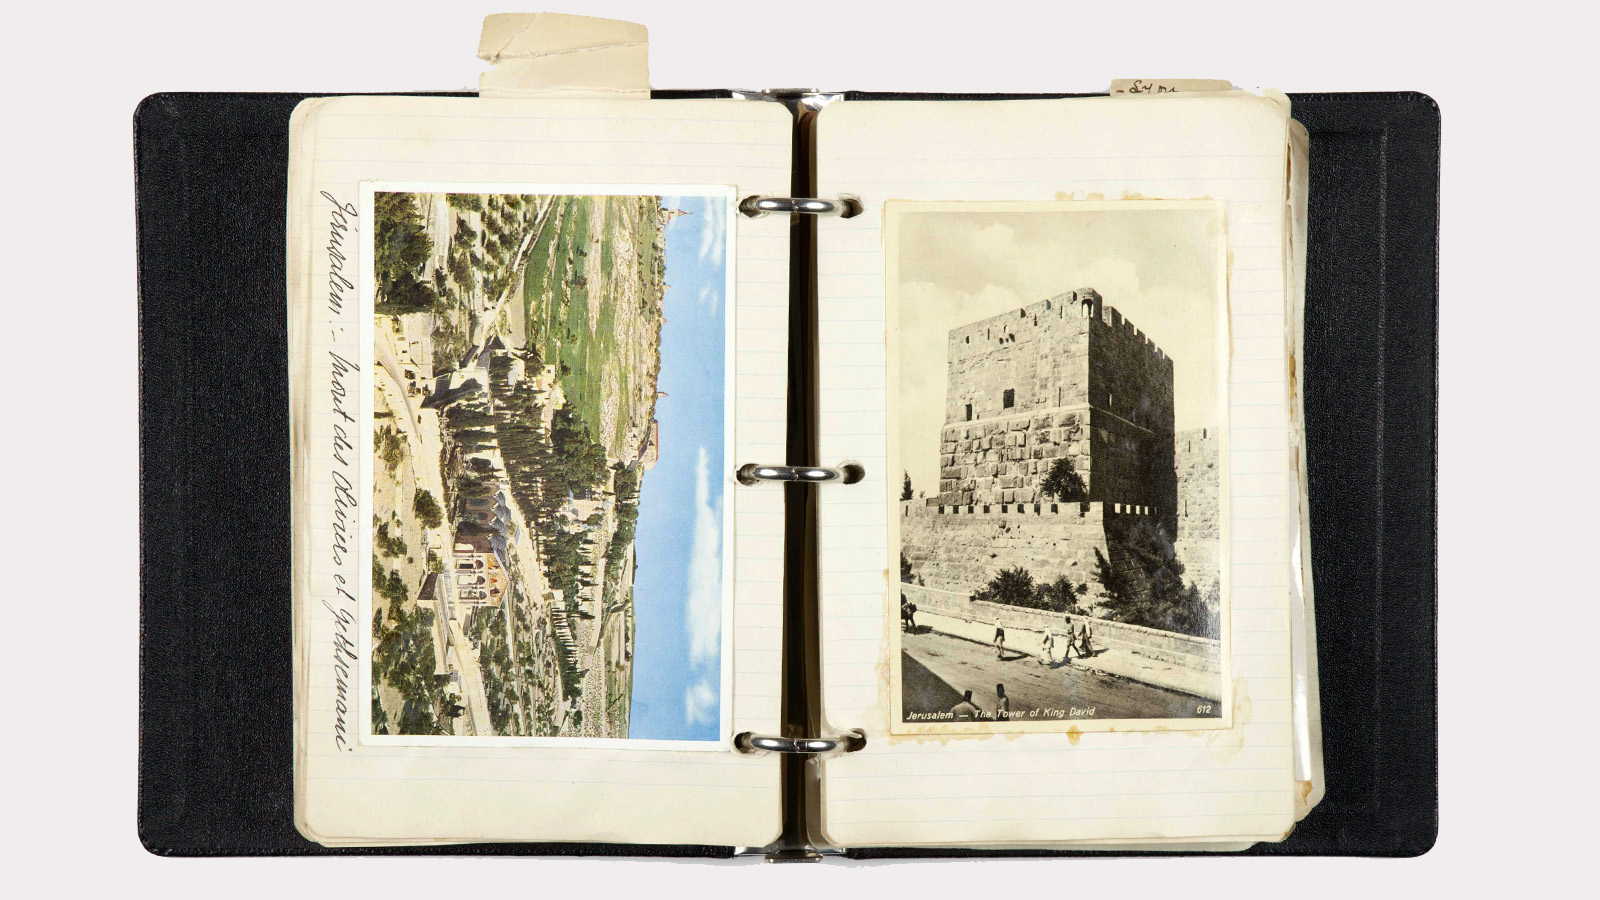 Postcards featuring views of the Garden of Gethsemane and the Mount of Olives, as well as the Tower of David. Travel diary of Calouste Gulbenkian, 1934. Gulbenkian Archives I04-055.